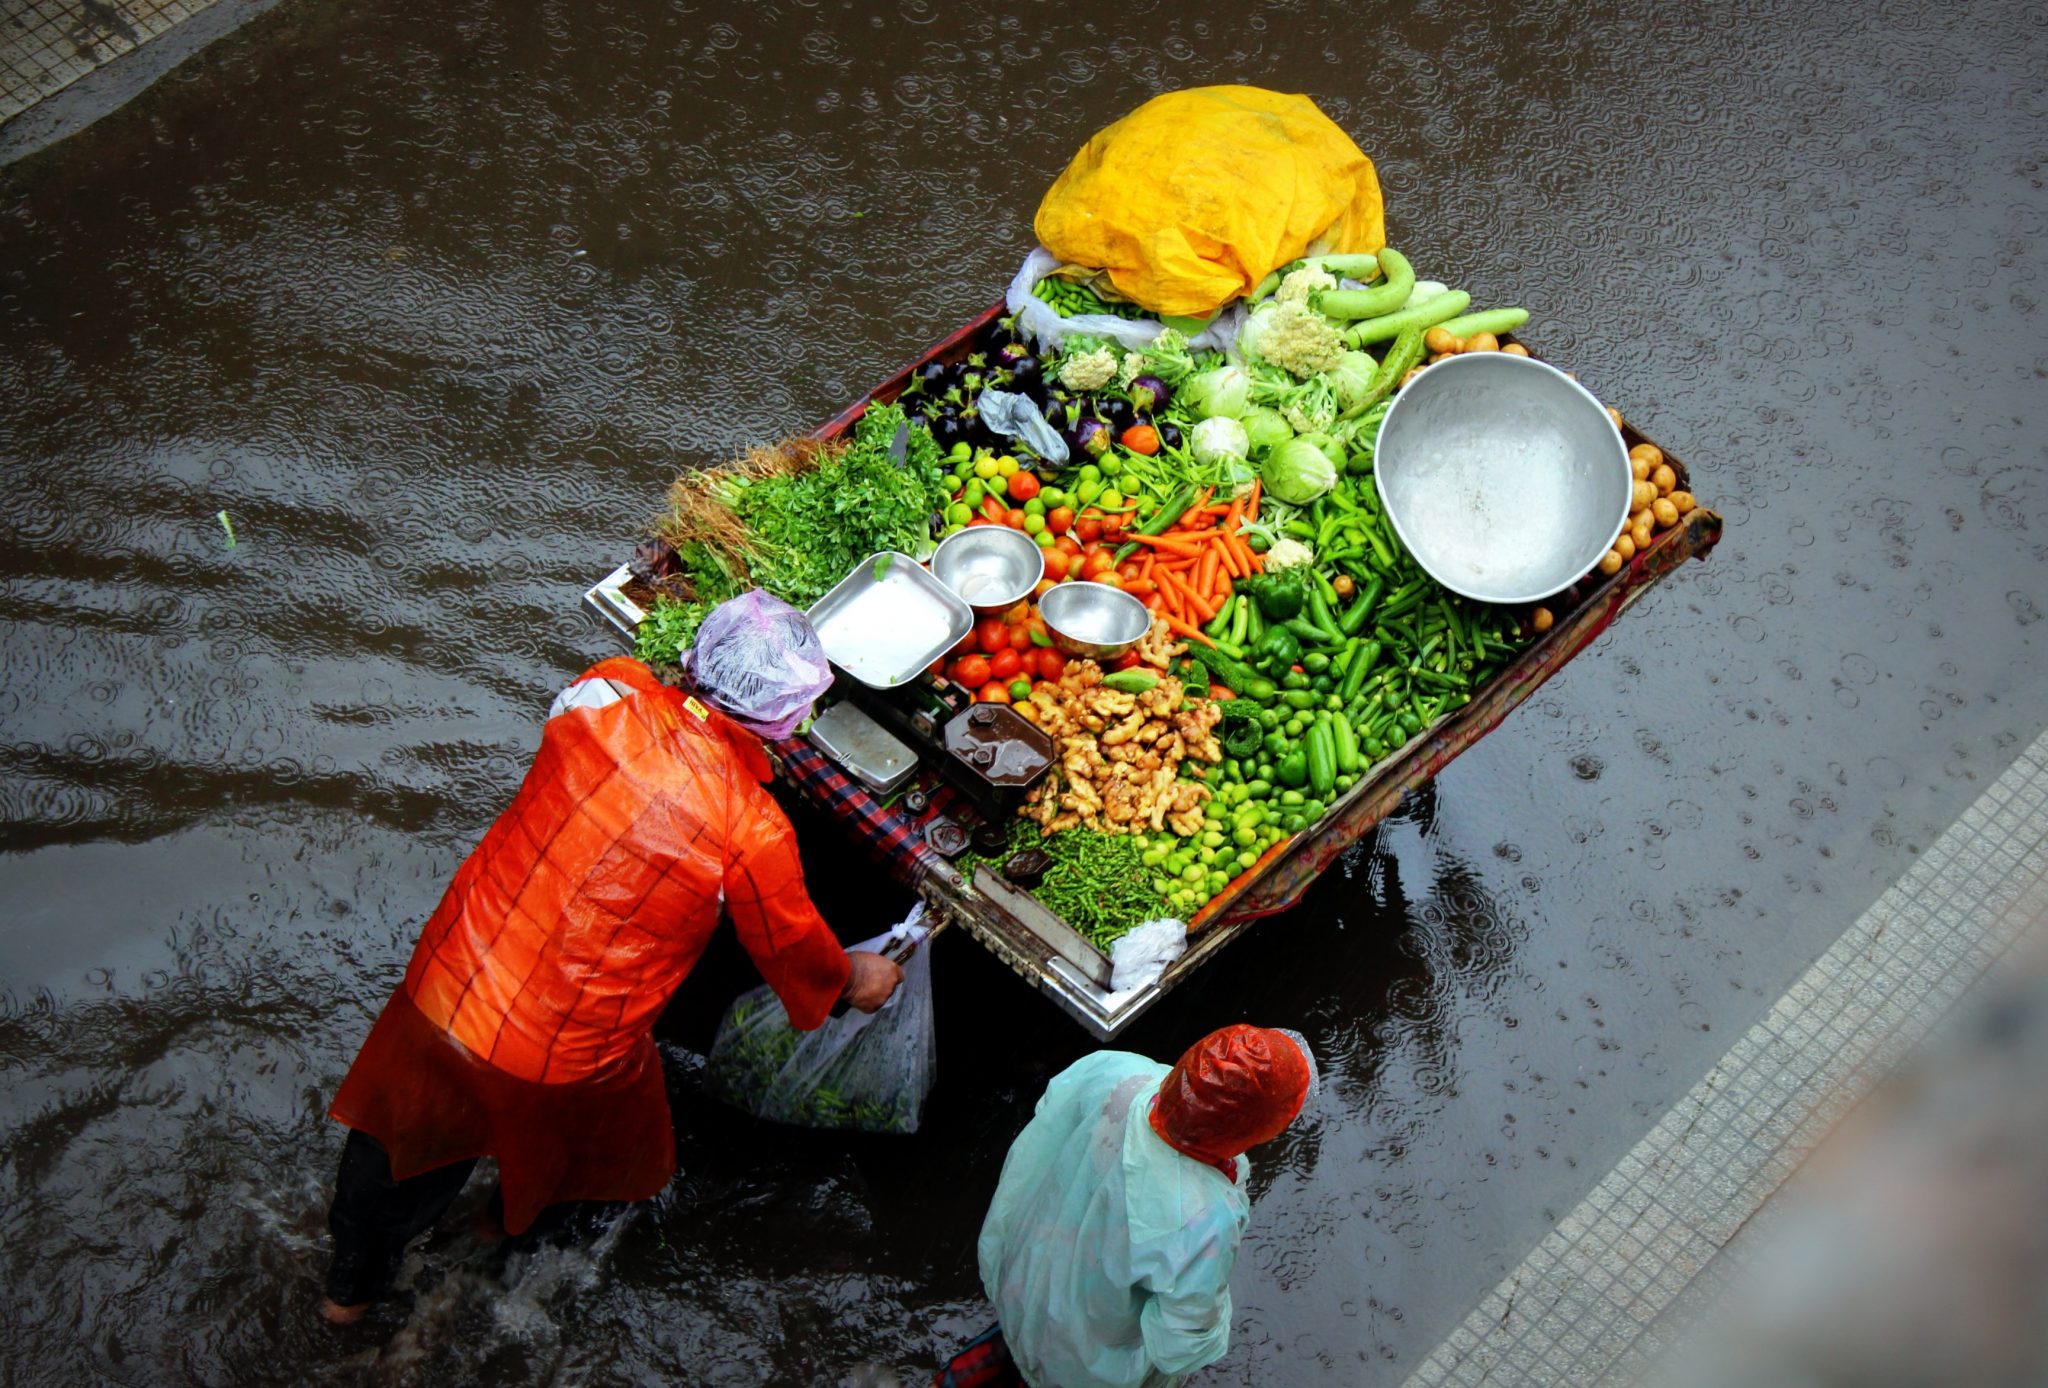 Man pushing cart with colorful vegetables in India 